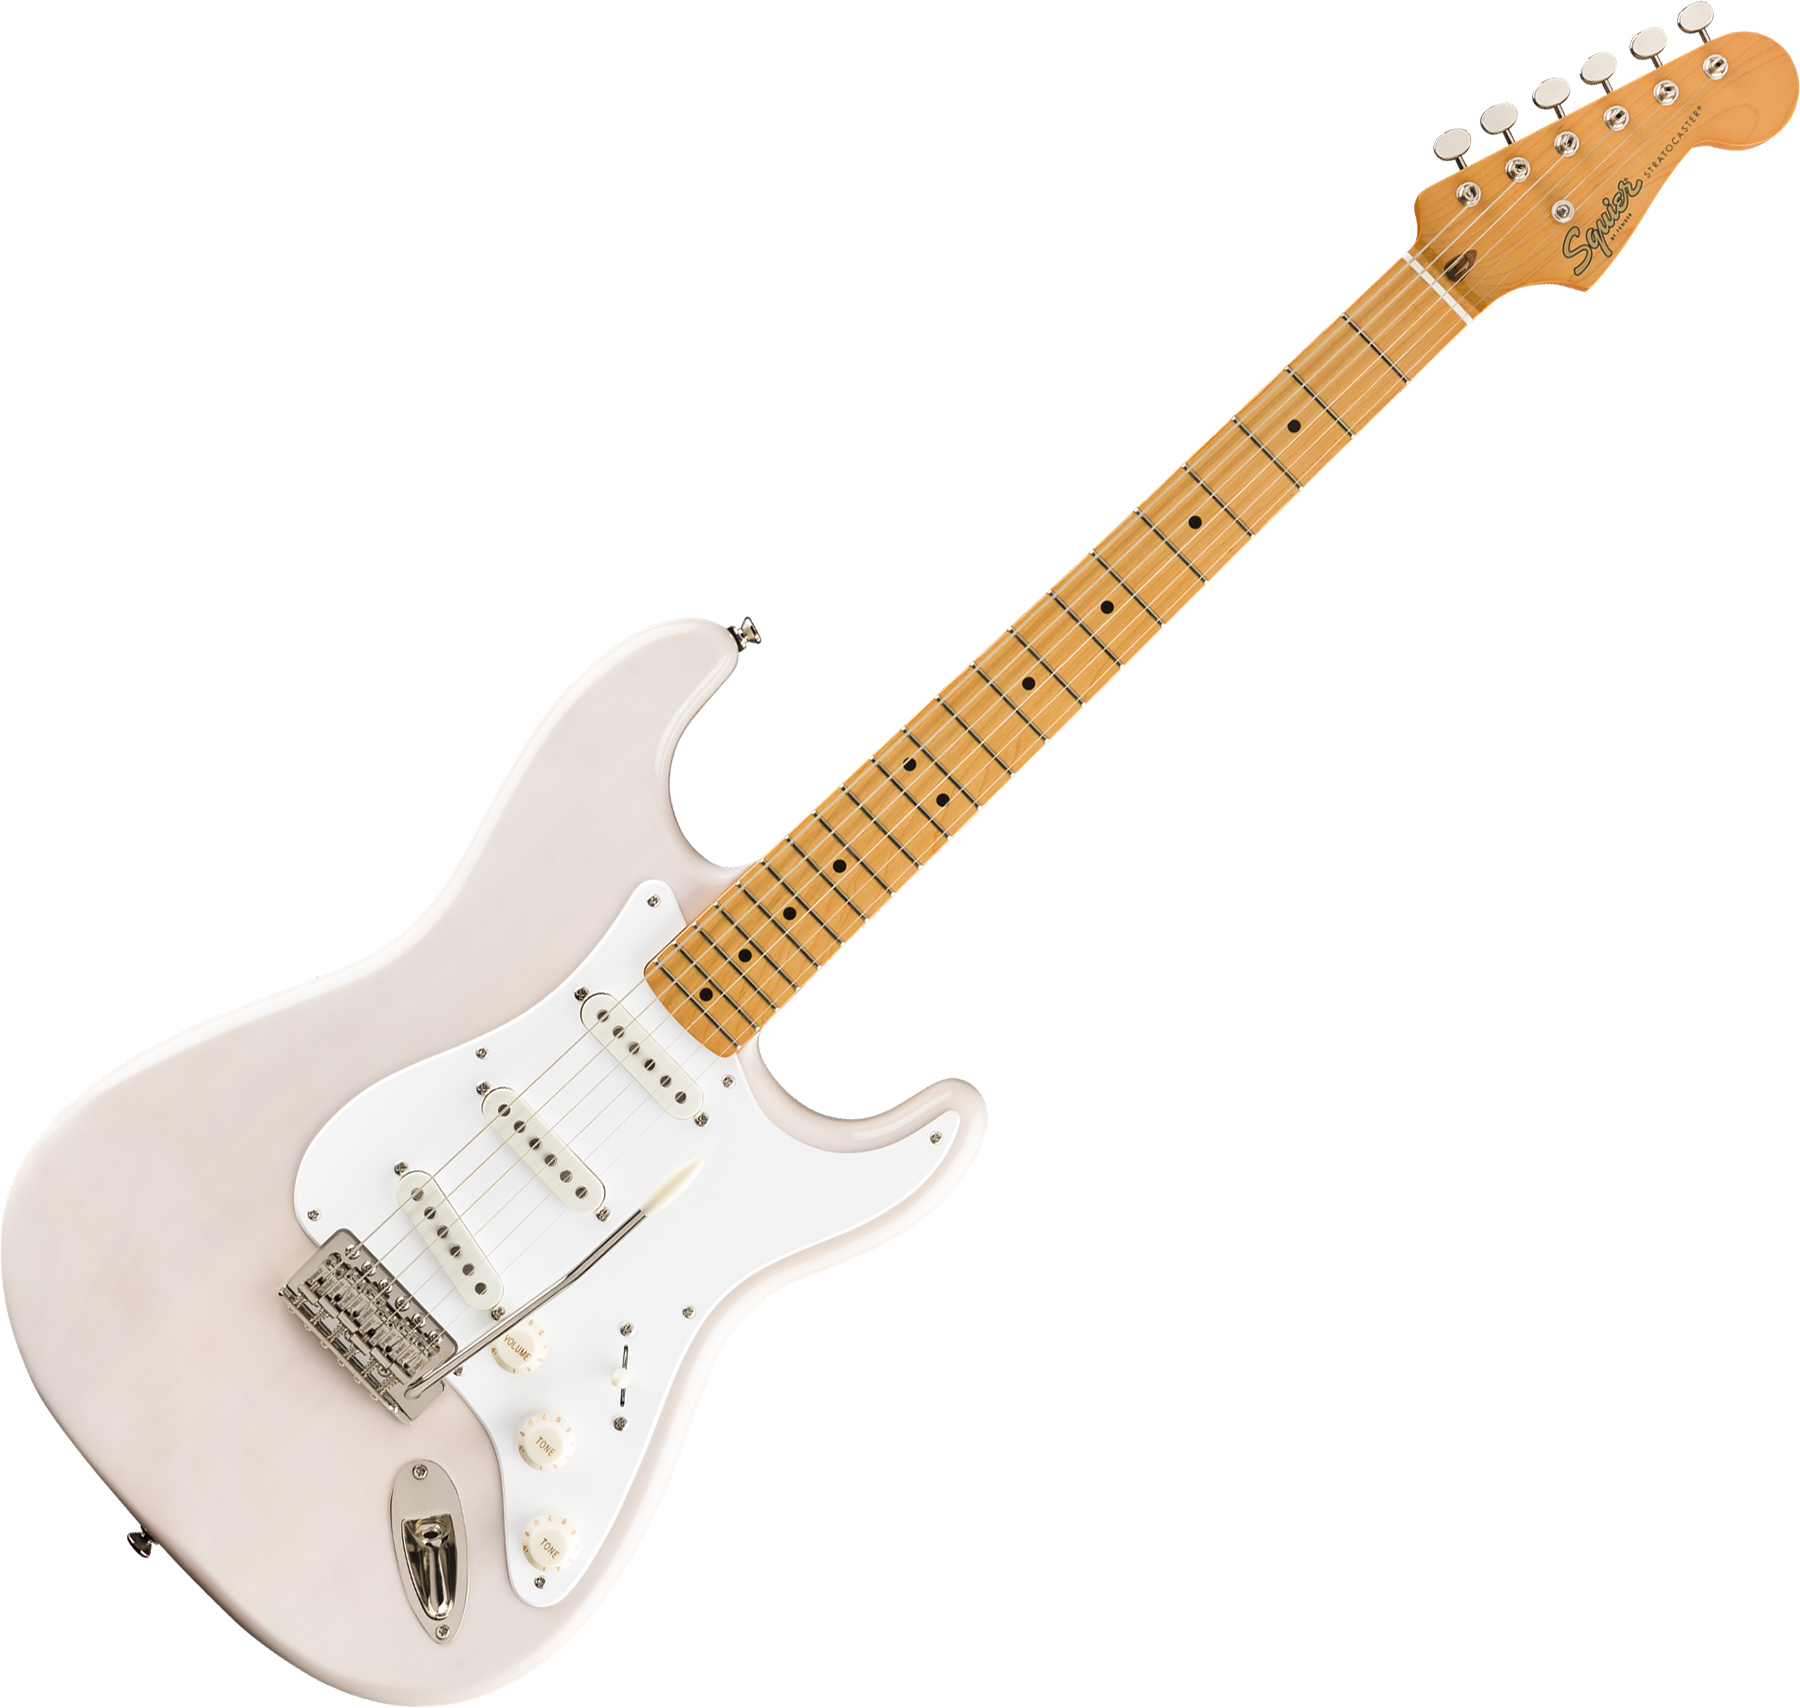 Squier Classic Vibe '50s Stratocaster - white blonde Solid body 